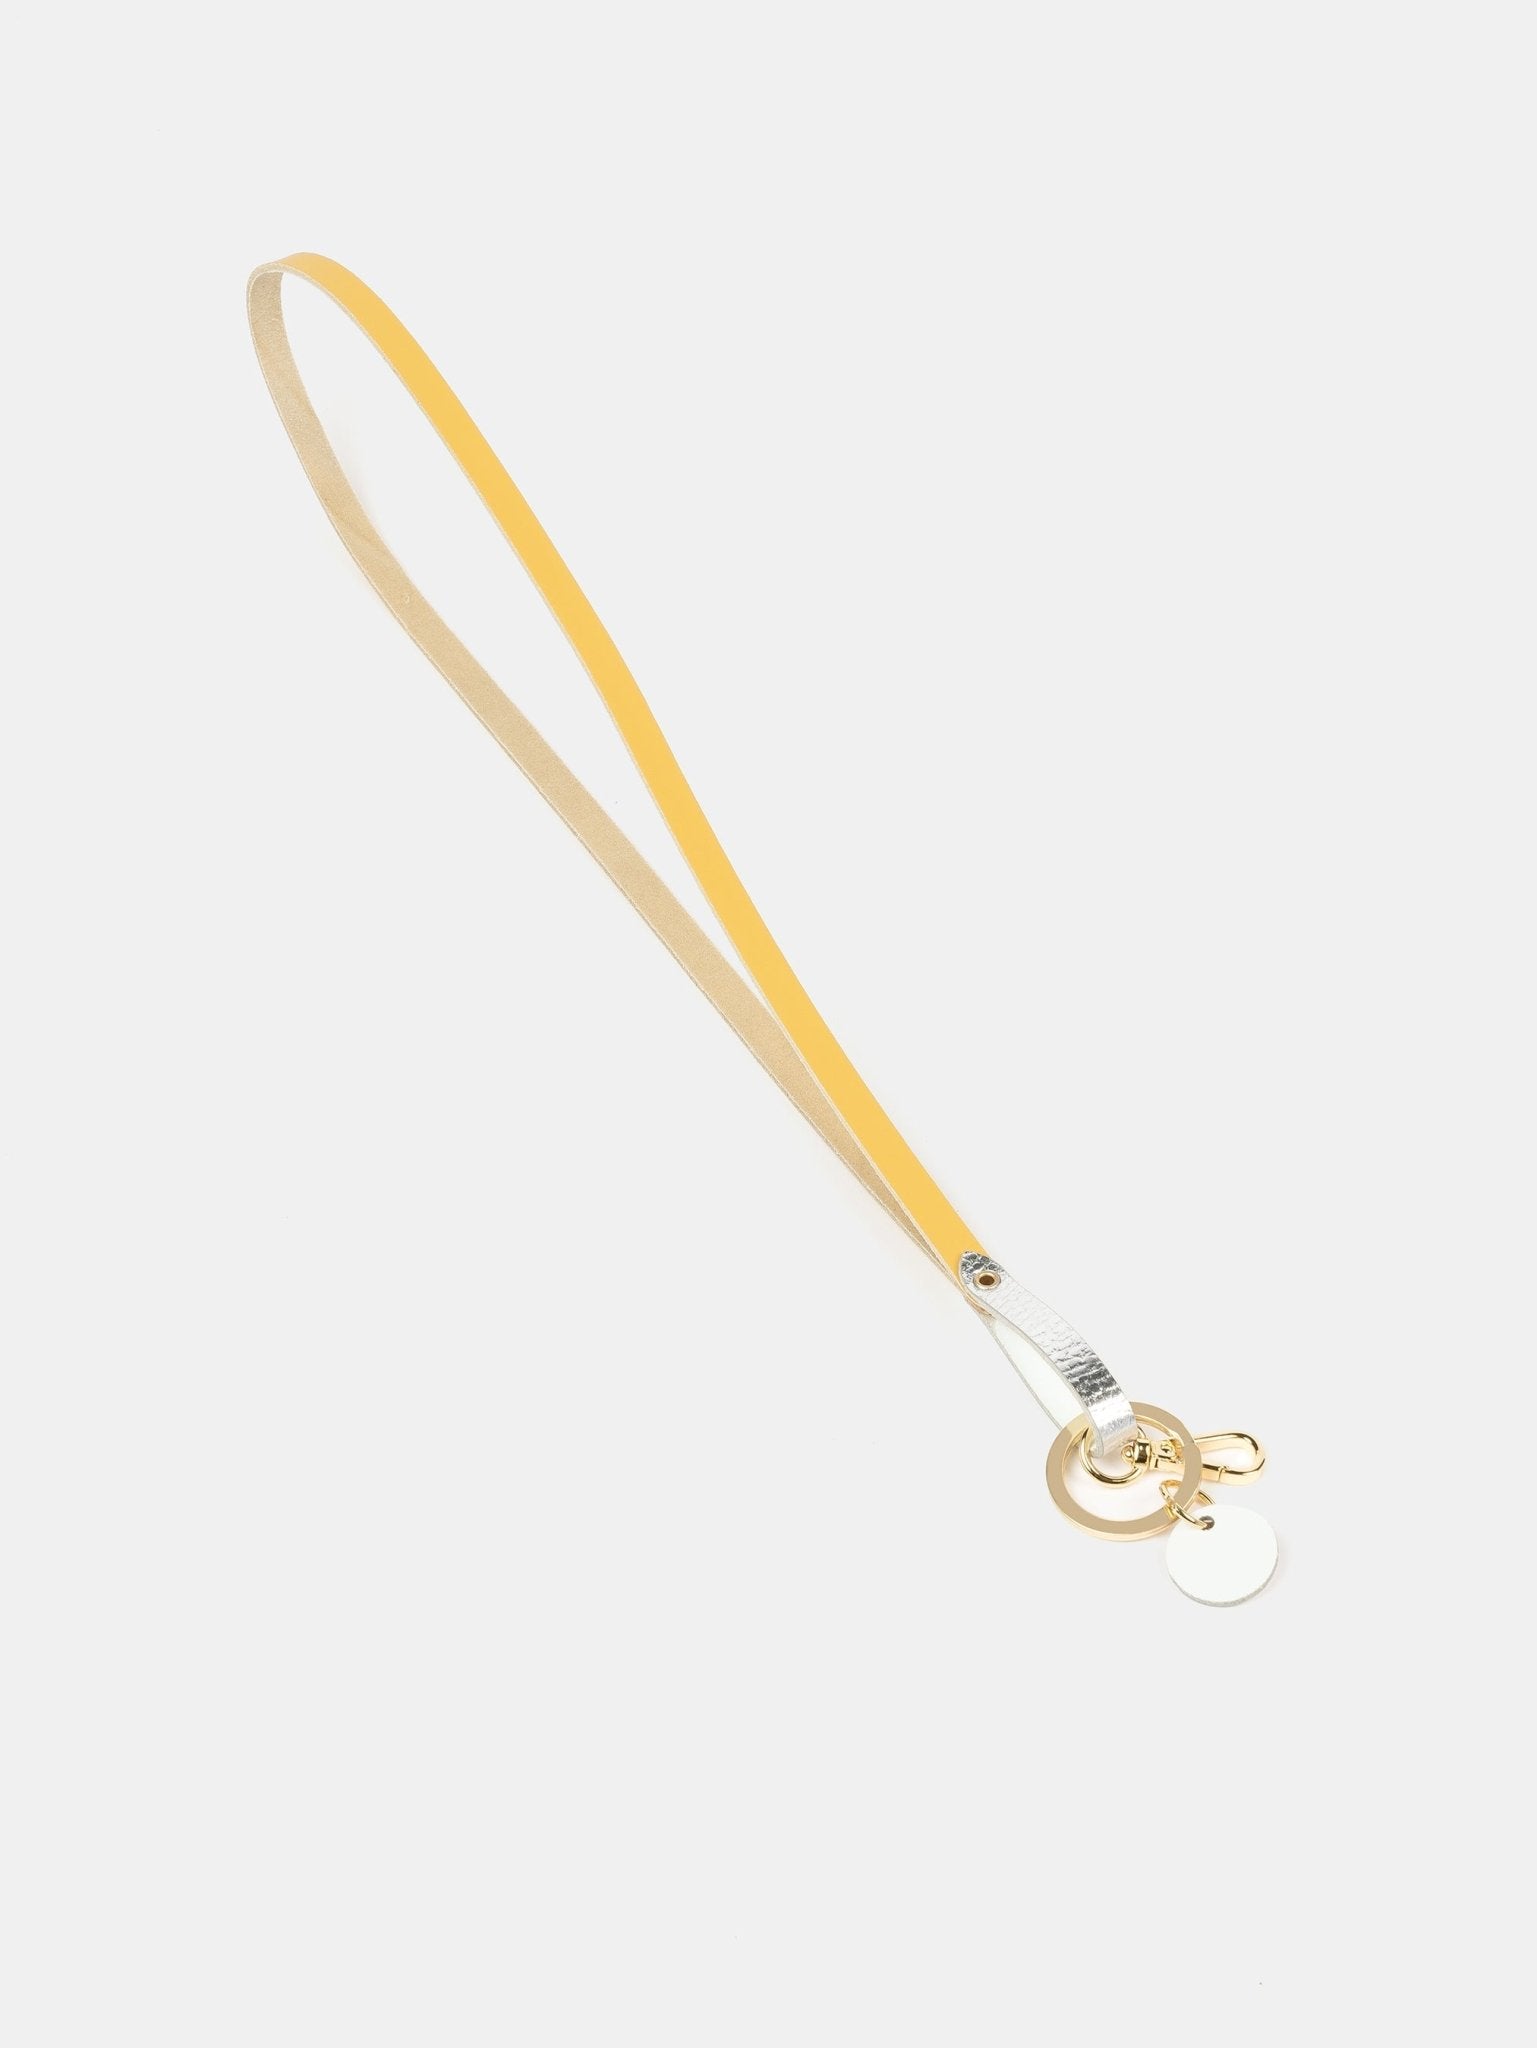 The Lanyard - Indian Yellow & Silver Foil - Cambridge Satchel US Store